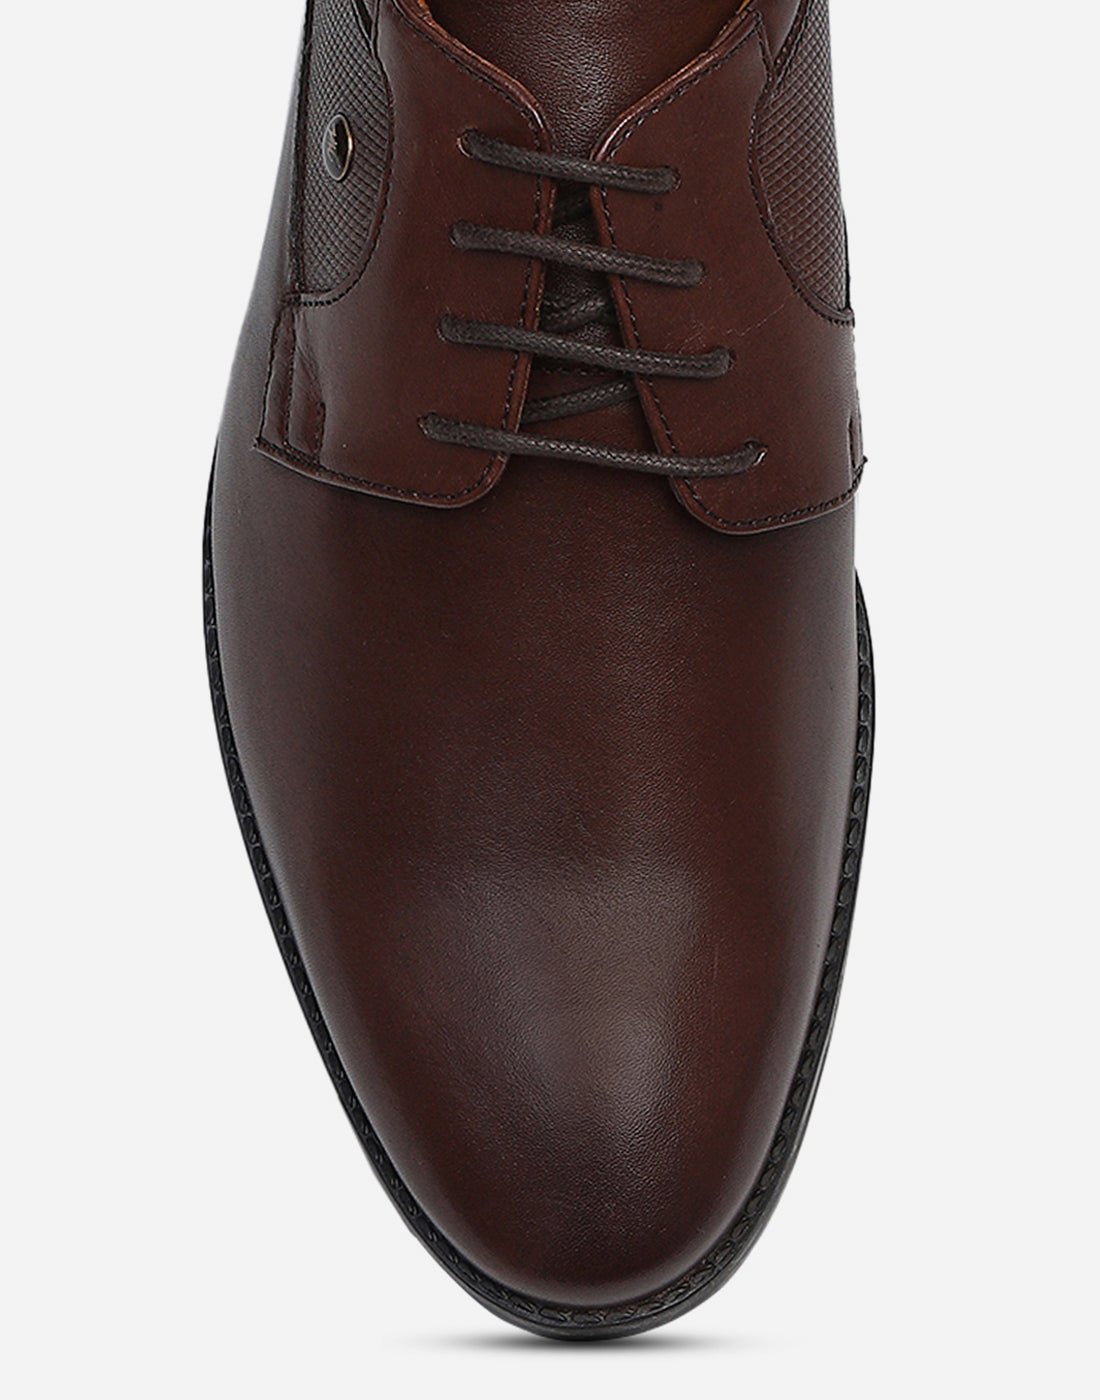 Men Brown Lace Up Genuine Leather Formal Derby